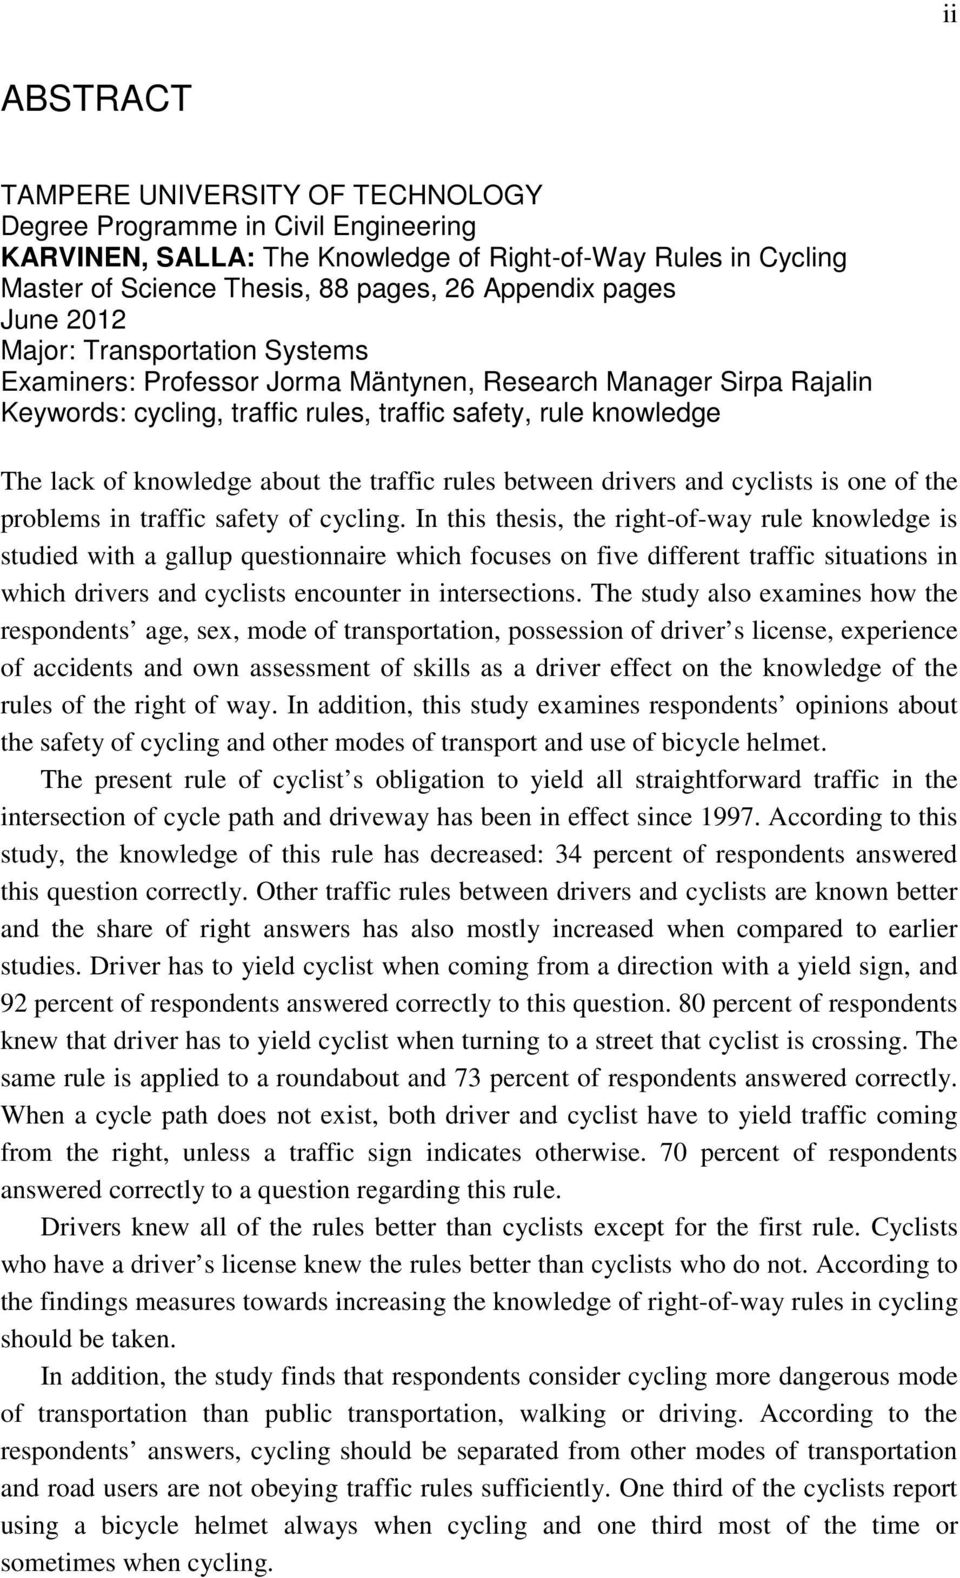 knowledge about the traffic rules between drivers and cyclists is one of the problems in traffic safety of cycling.